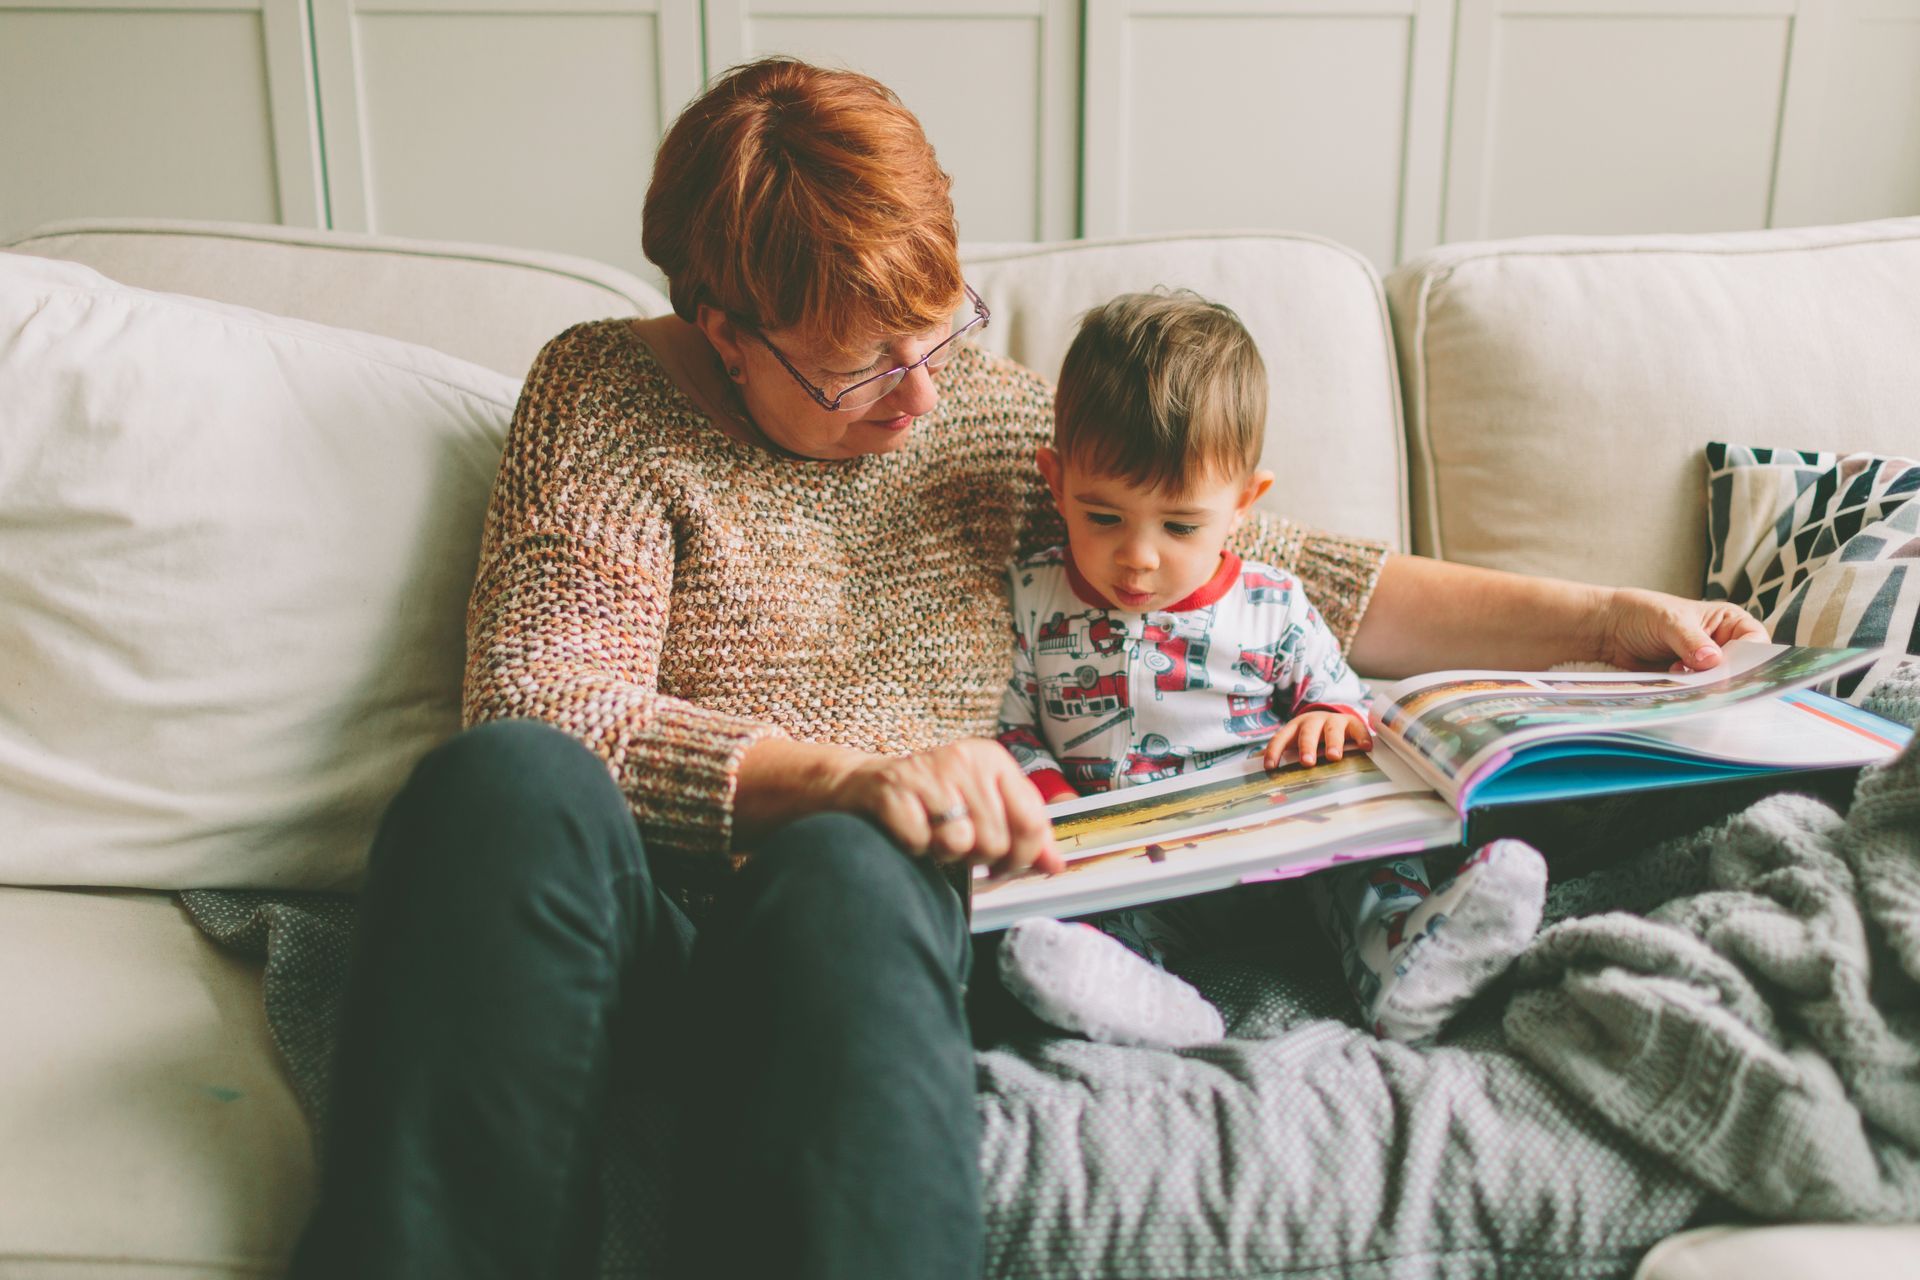 A woman is sitting on a couch reading a book to a baby.